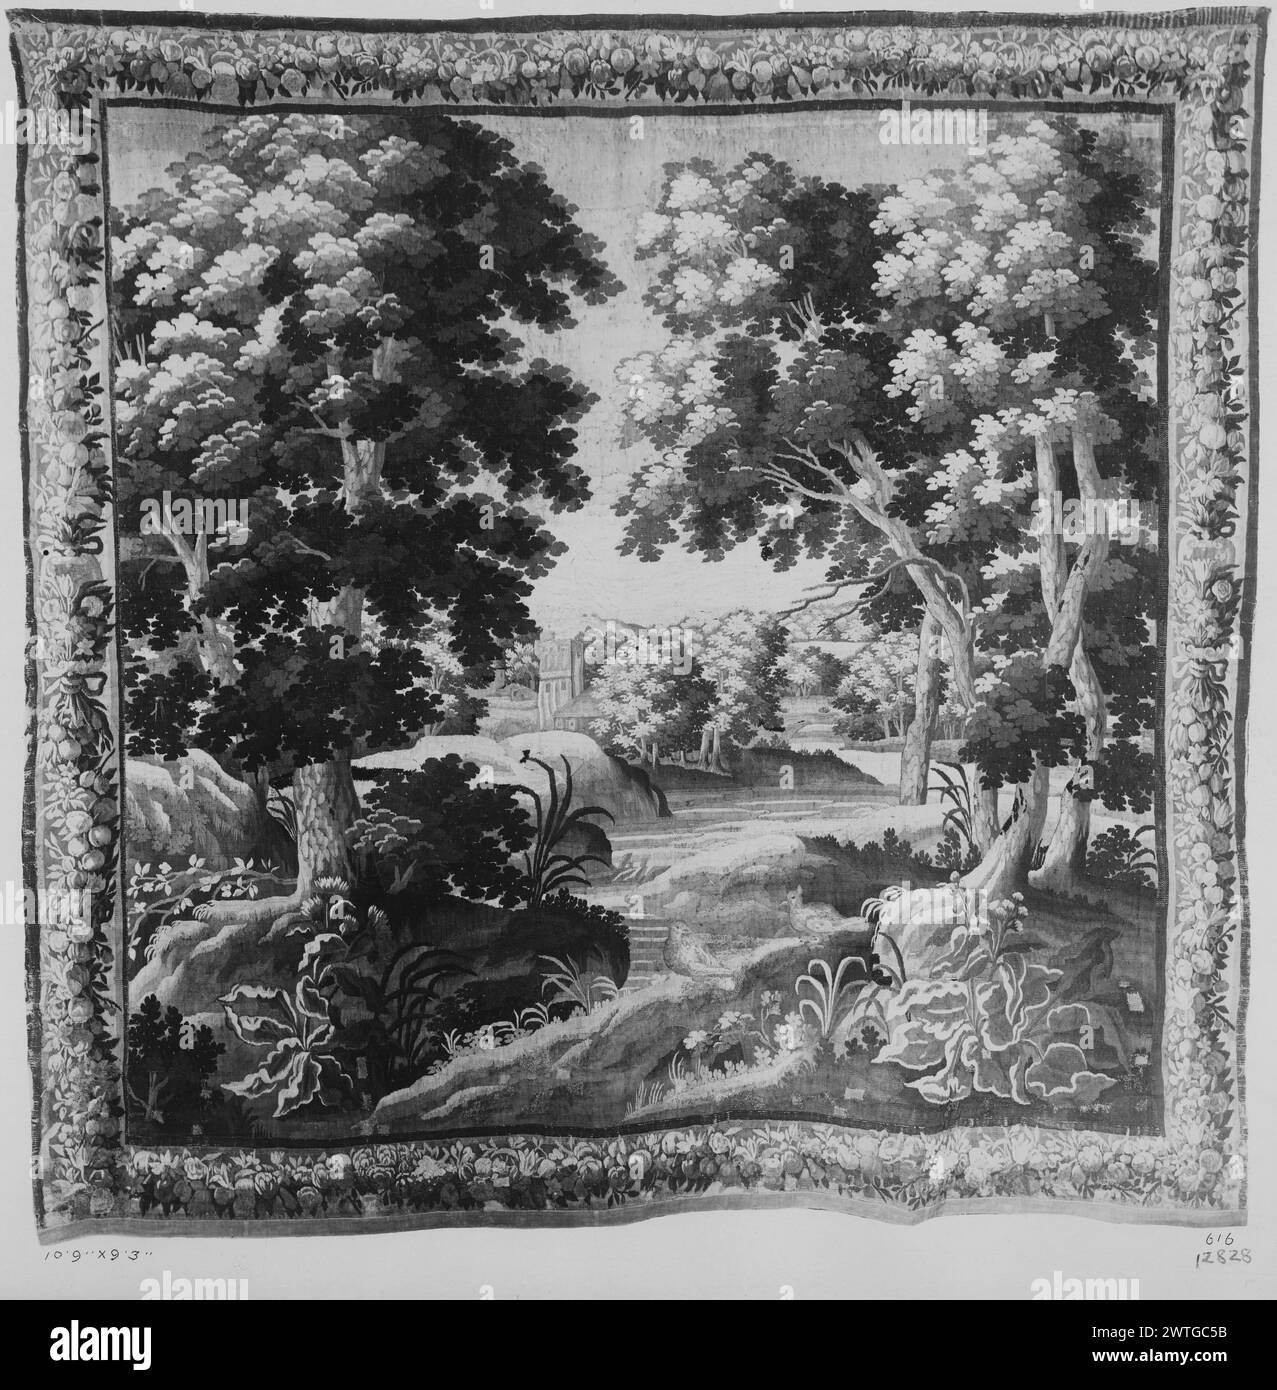 Landscape with birds, a creek, and buildings in distance. unknown c. 1675-1725 Tapestry Dimensions: H 9'3' x W 10'9' Tapestry Materials/Techniques: unknown Culture: Flemish Weaving Center: unknown Ownership History: French & Co. purchased from J. G. Luke (2856) 4/14/1924 [crossed out]; sold to R. D. Hopkins 12/17/1926. Stock Photo